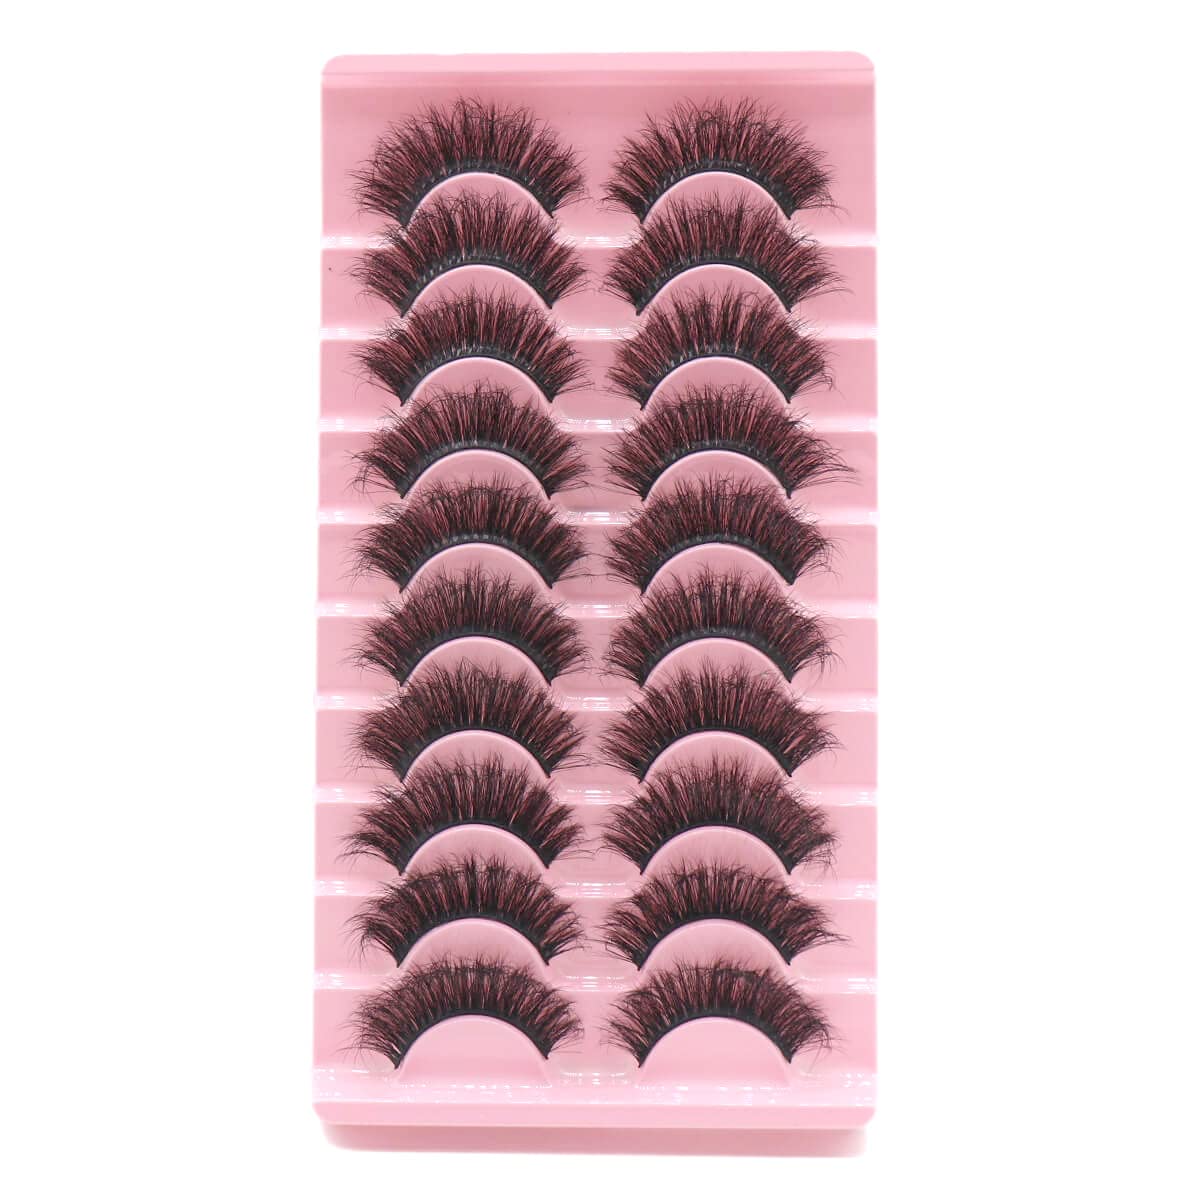 VGTE False Eyelashes Fluffy Wispy Curly Natural Faux Mink Lashes 3D Reusable Lightweight Short Fake Eye Lashes 16MM 10 Pairs Pack